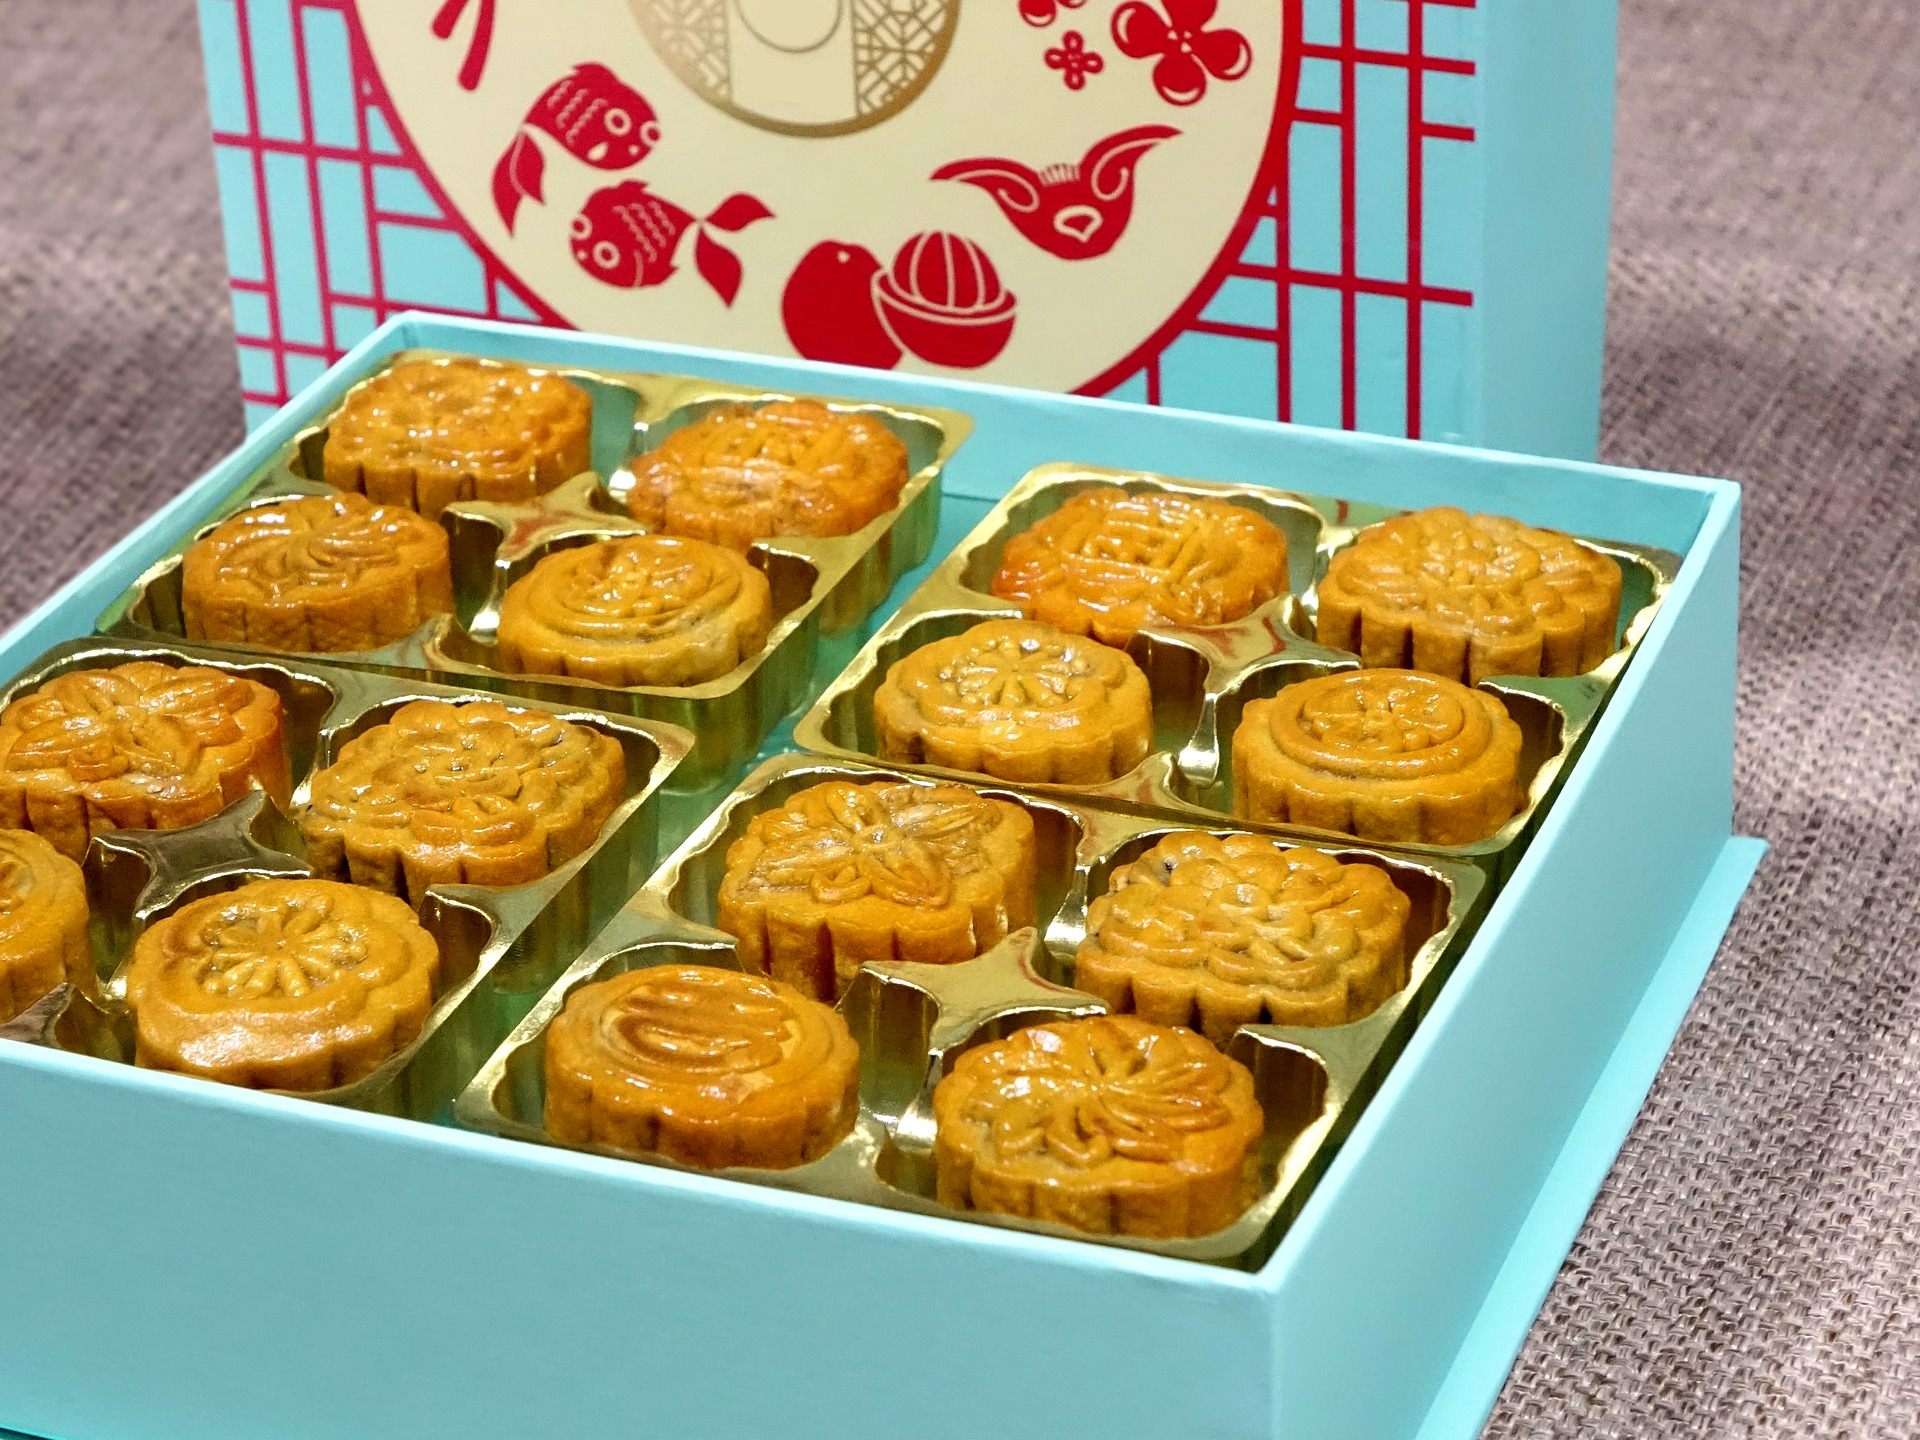 The Most Luxurious Mooncakes for Mid-Autumn Festival 2022